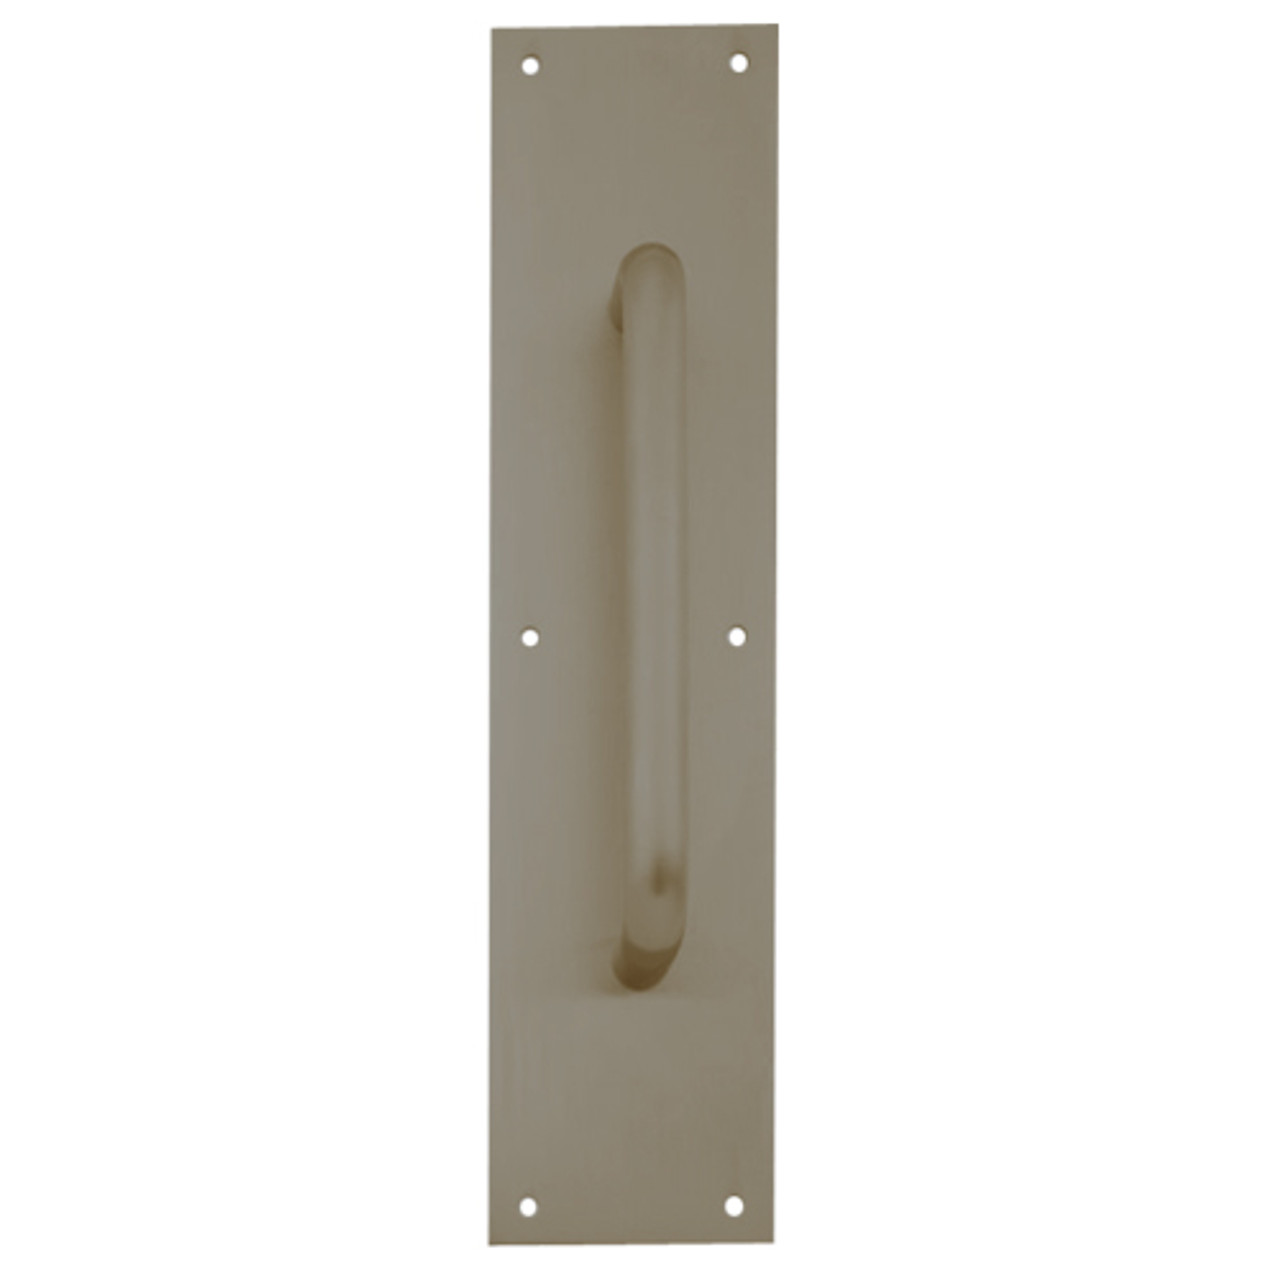 8302-6-US10B-4x16 IVES Architectural Door Trim 4x16 Inch Pull Plate in Oil Rubbed Bronze